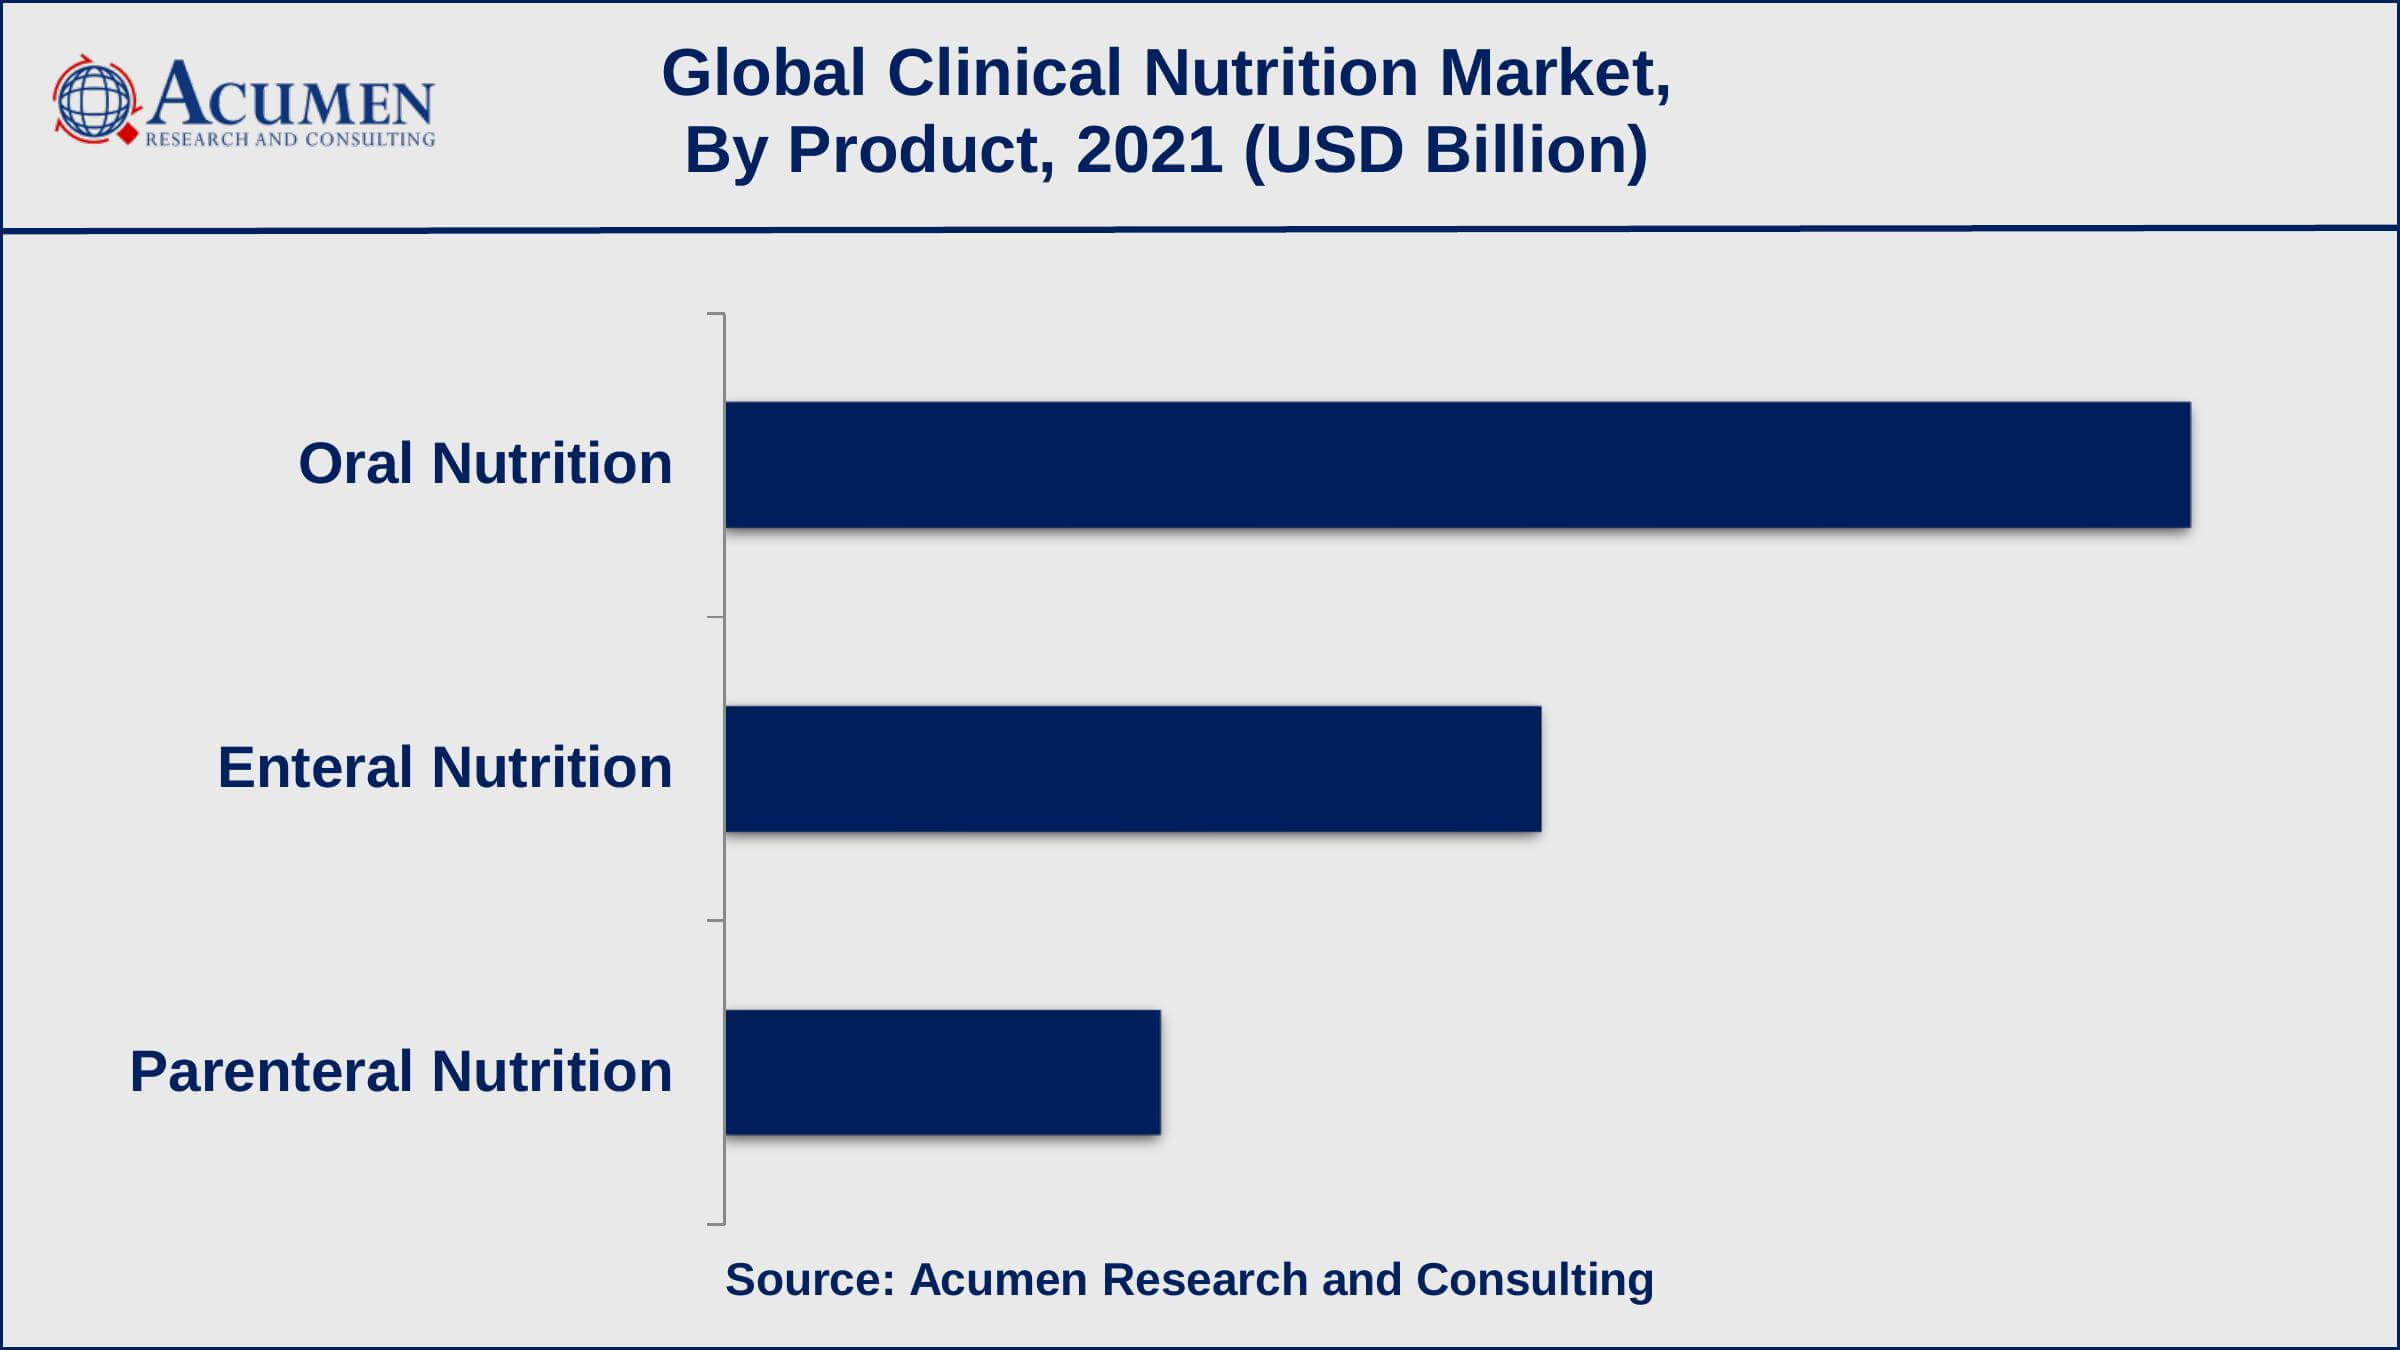 Based on product, oral nutrition recorded over 54% of the overall market share in 2021